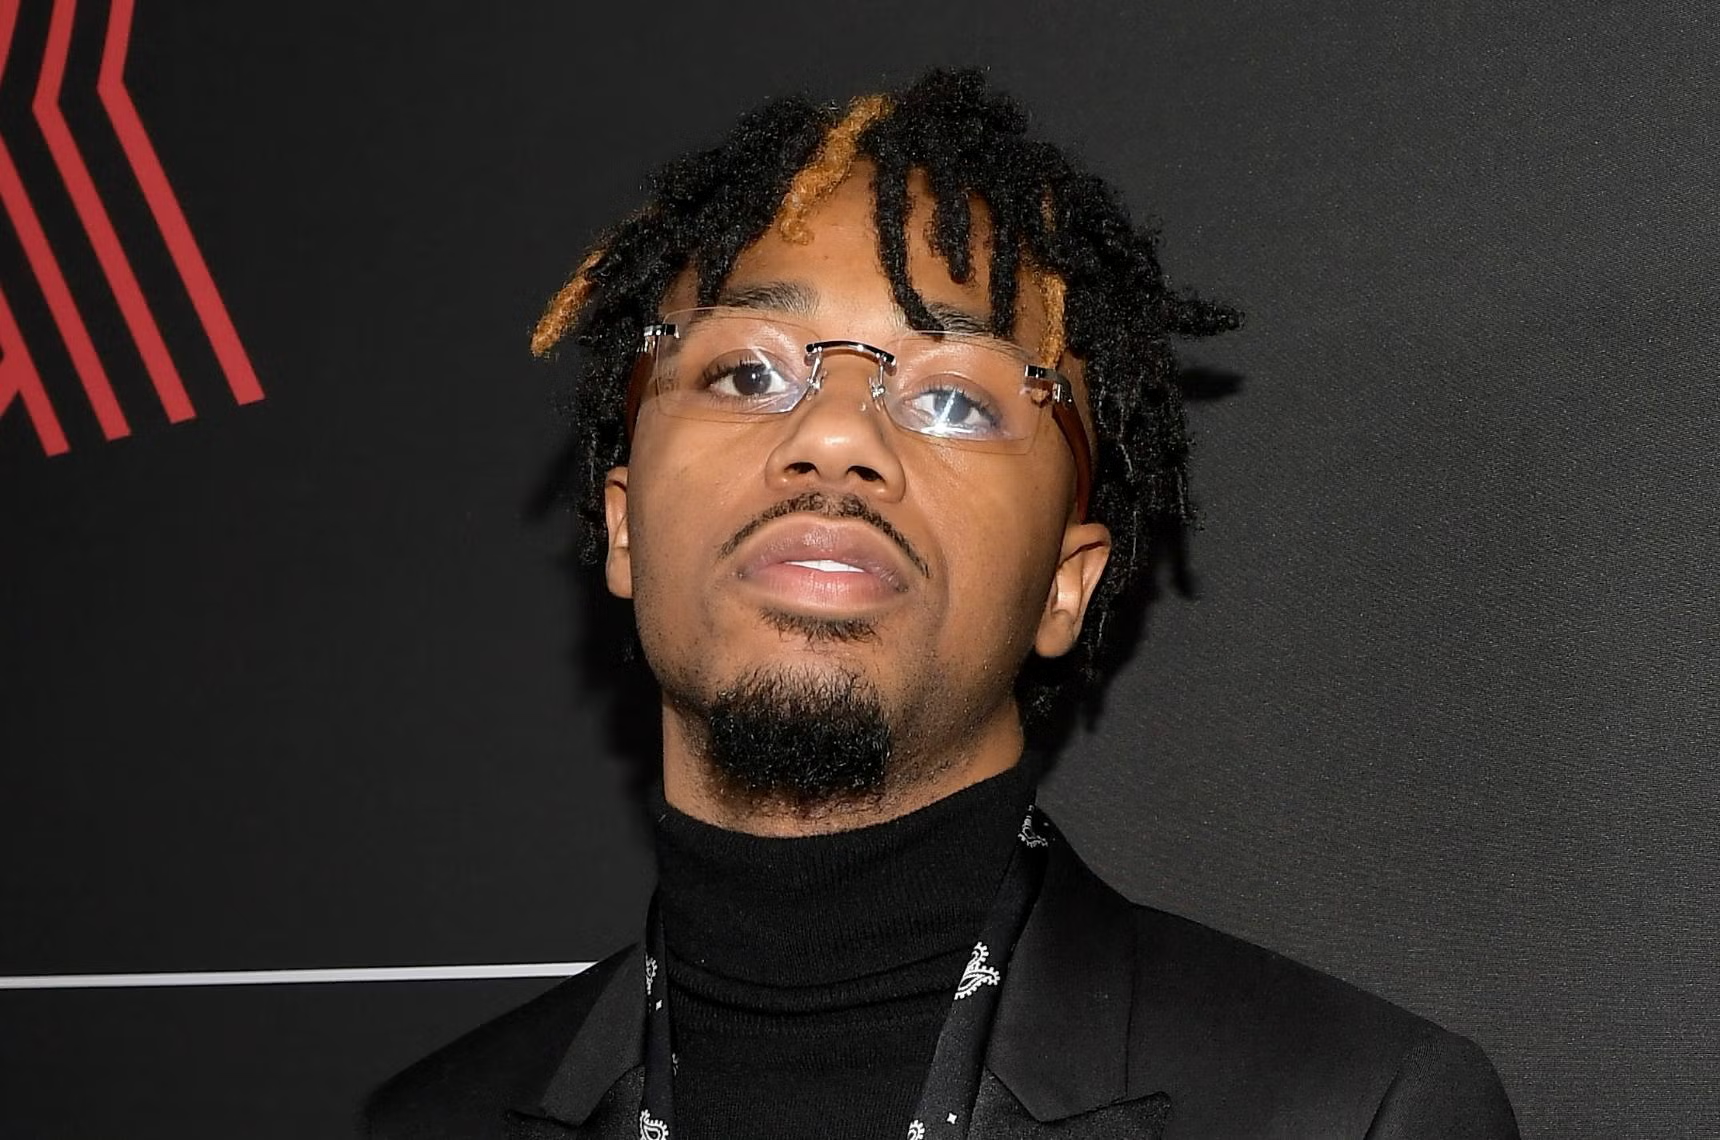 Metro Boomin is one of the hottest hip-hop producers right now